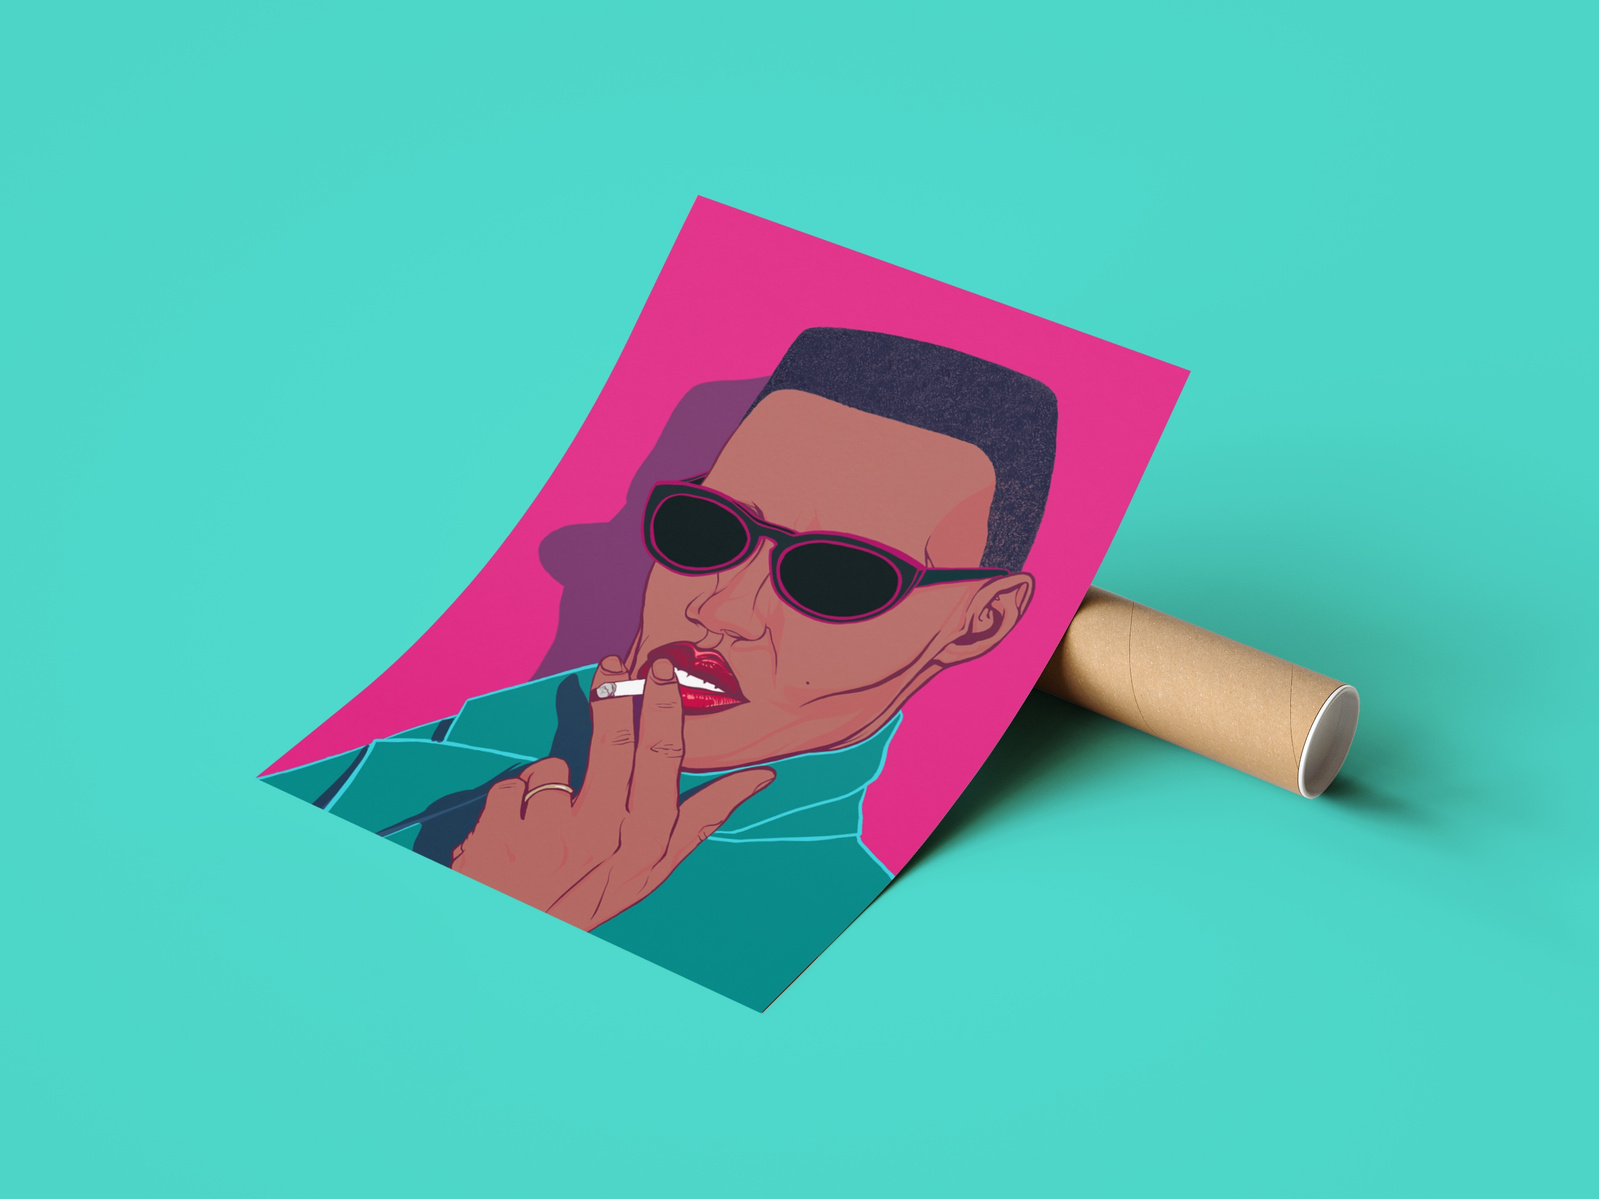 Grace Jones Fine art Print by Ryan Hodge illustration Print with tube on turquoise background.  Sizes A4, A3, A2 - print only or optional framing. Perfect wall art 
gift  